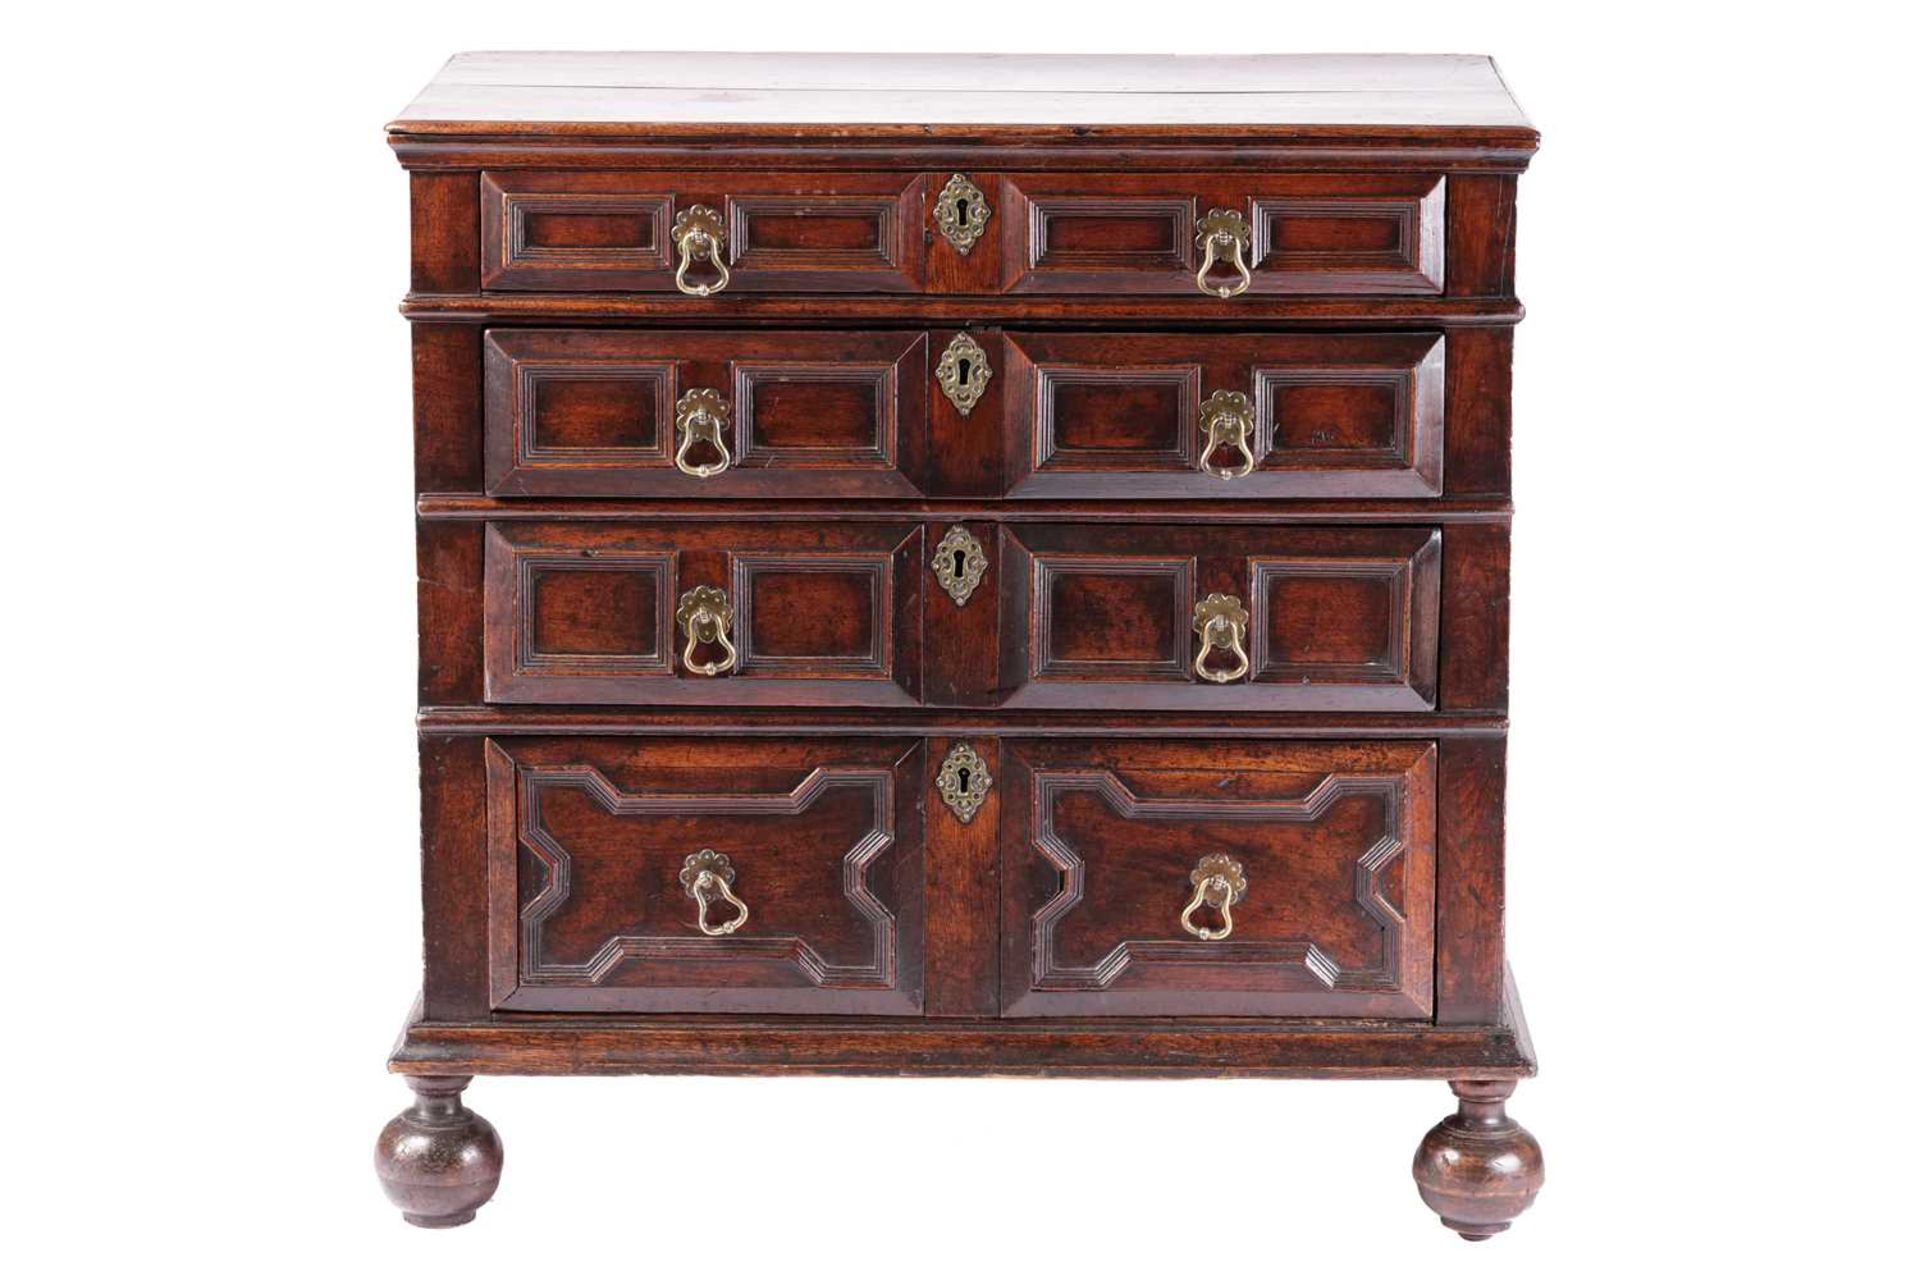 A late 17th-century walnut chest of four long drawers with raised geometric moulded fronts and